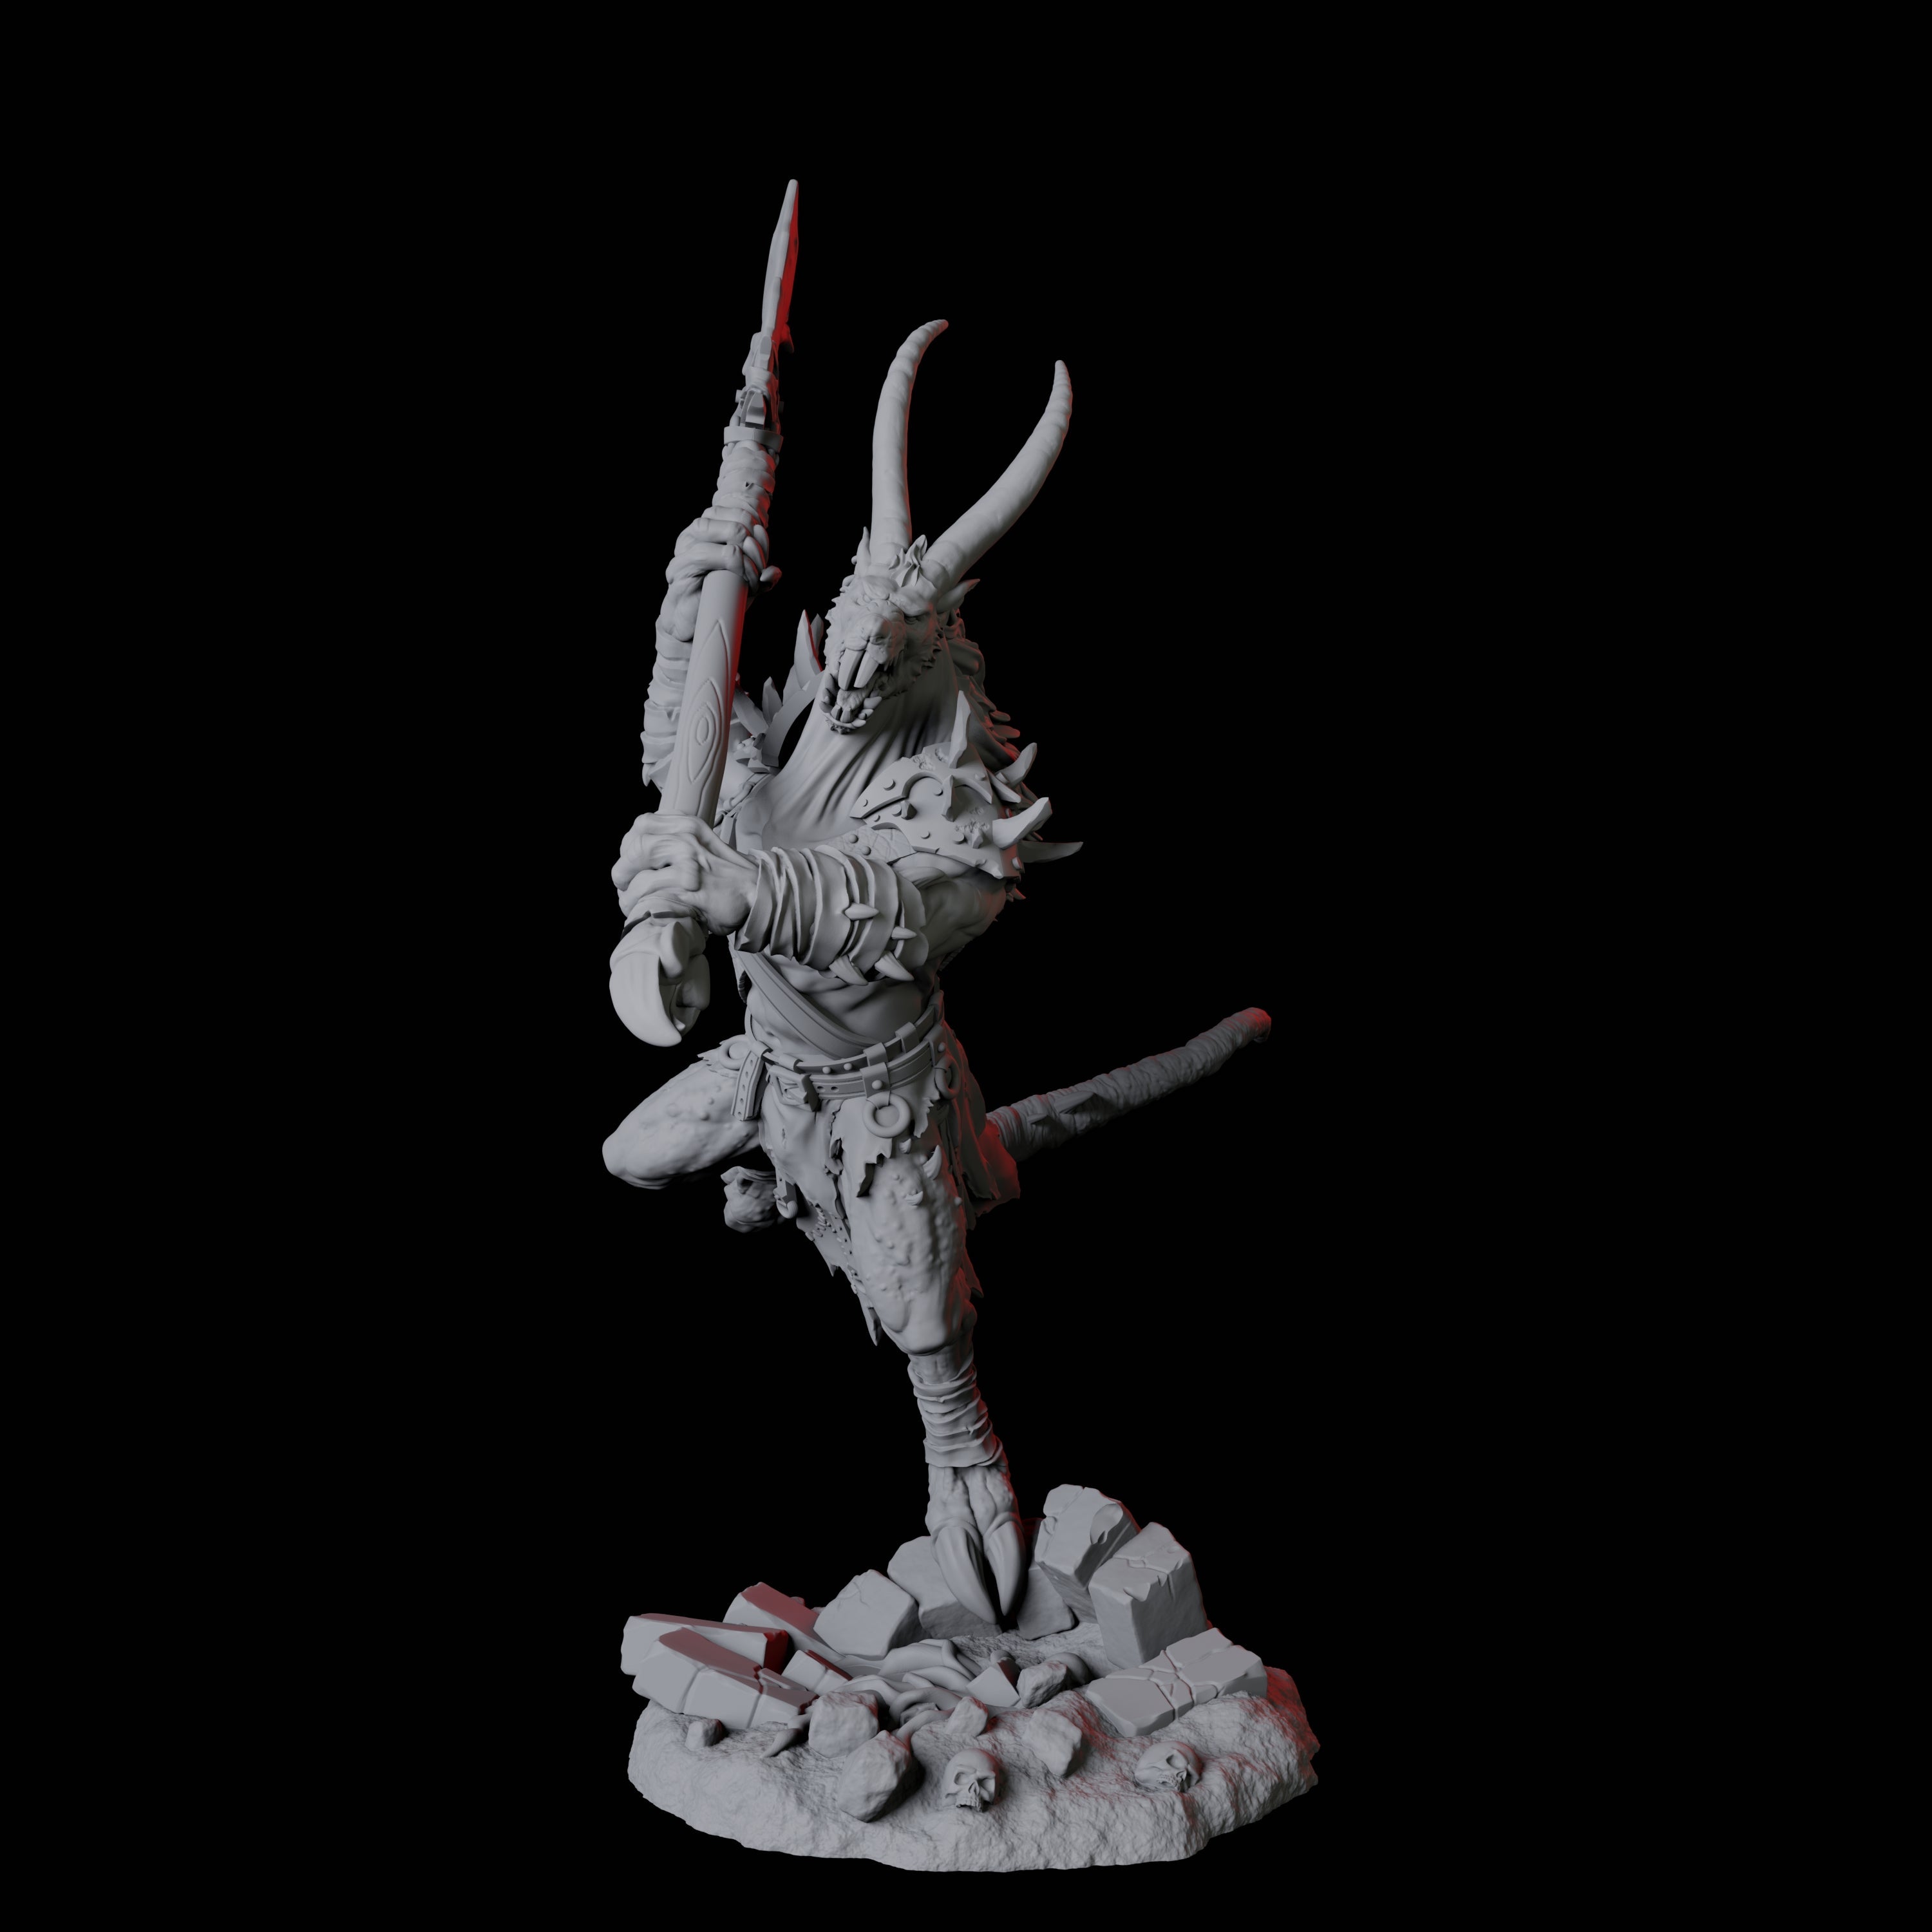 Blackfang Mutant Ratfolk D Miniature for Dungeons and Dragons, Pathfinder or other TTRPGs